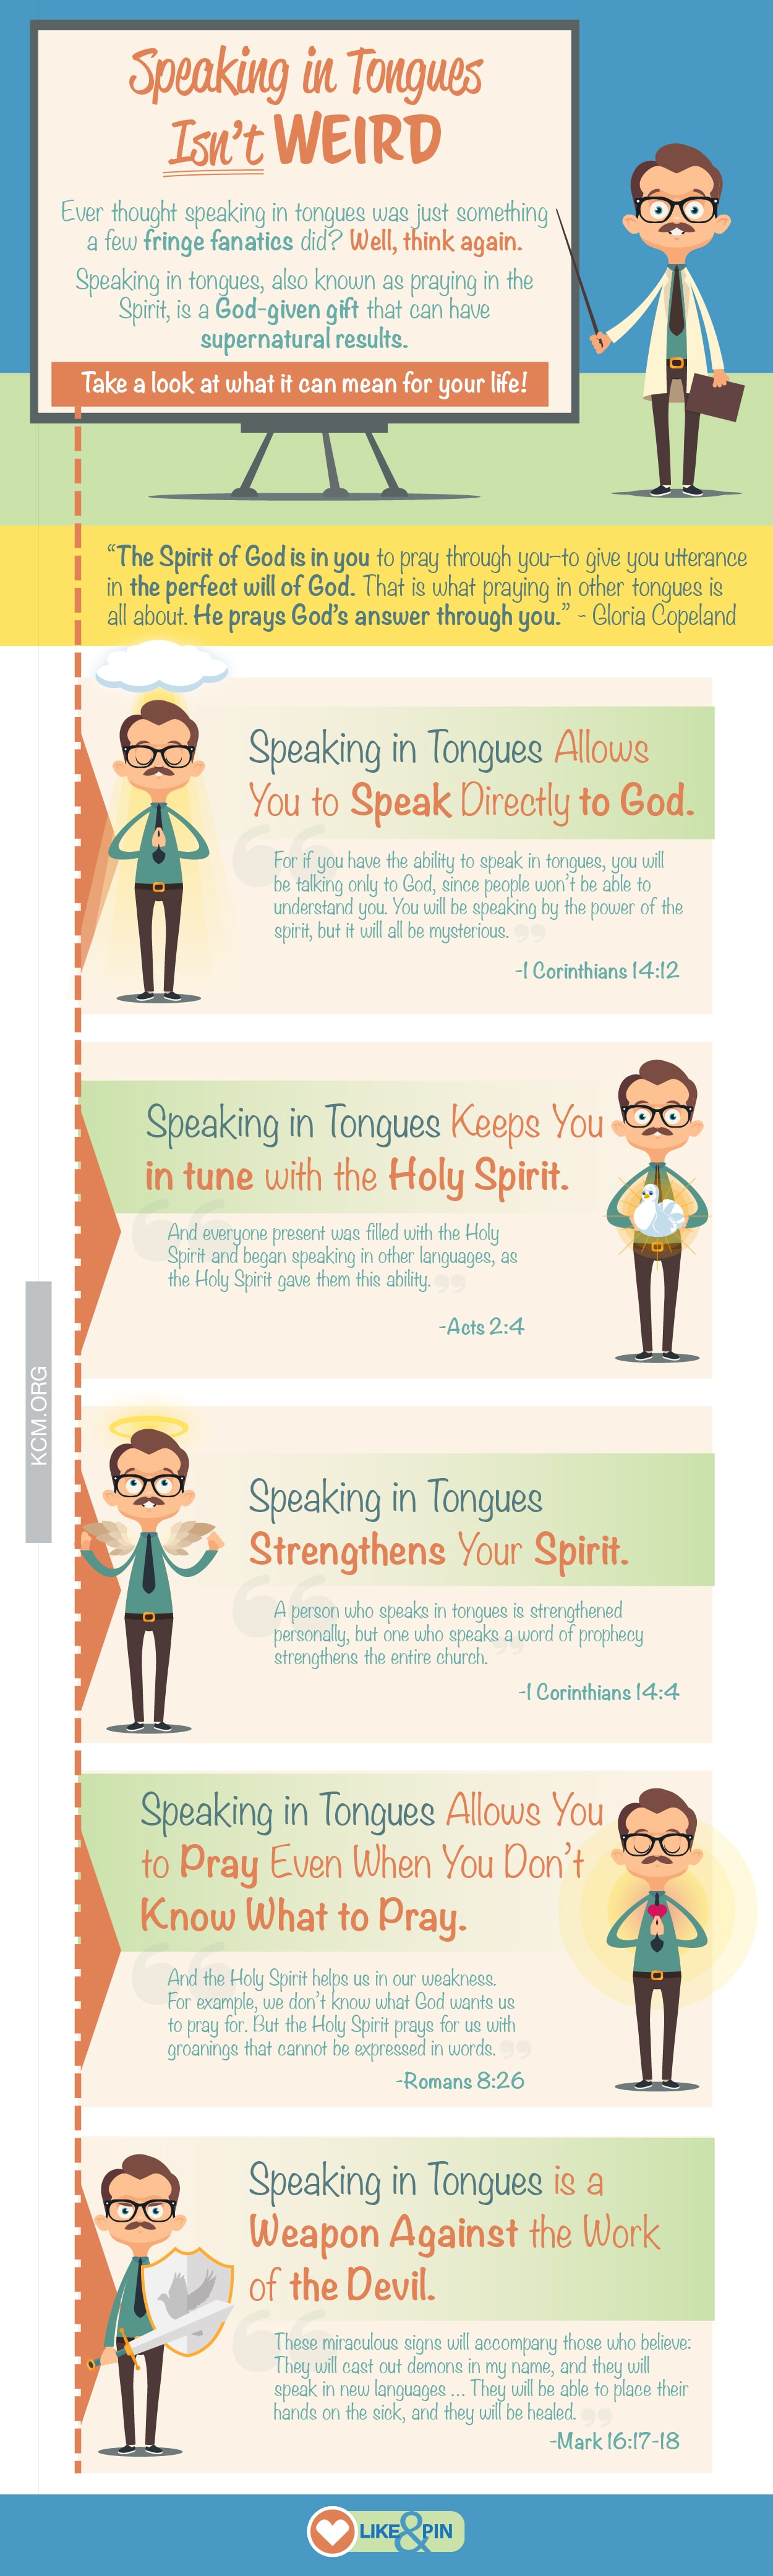 Speaking in Tongues Isn't Weird!